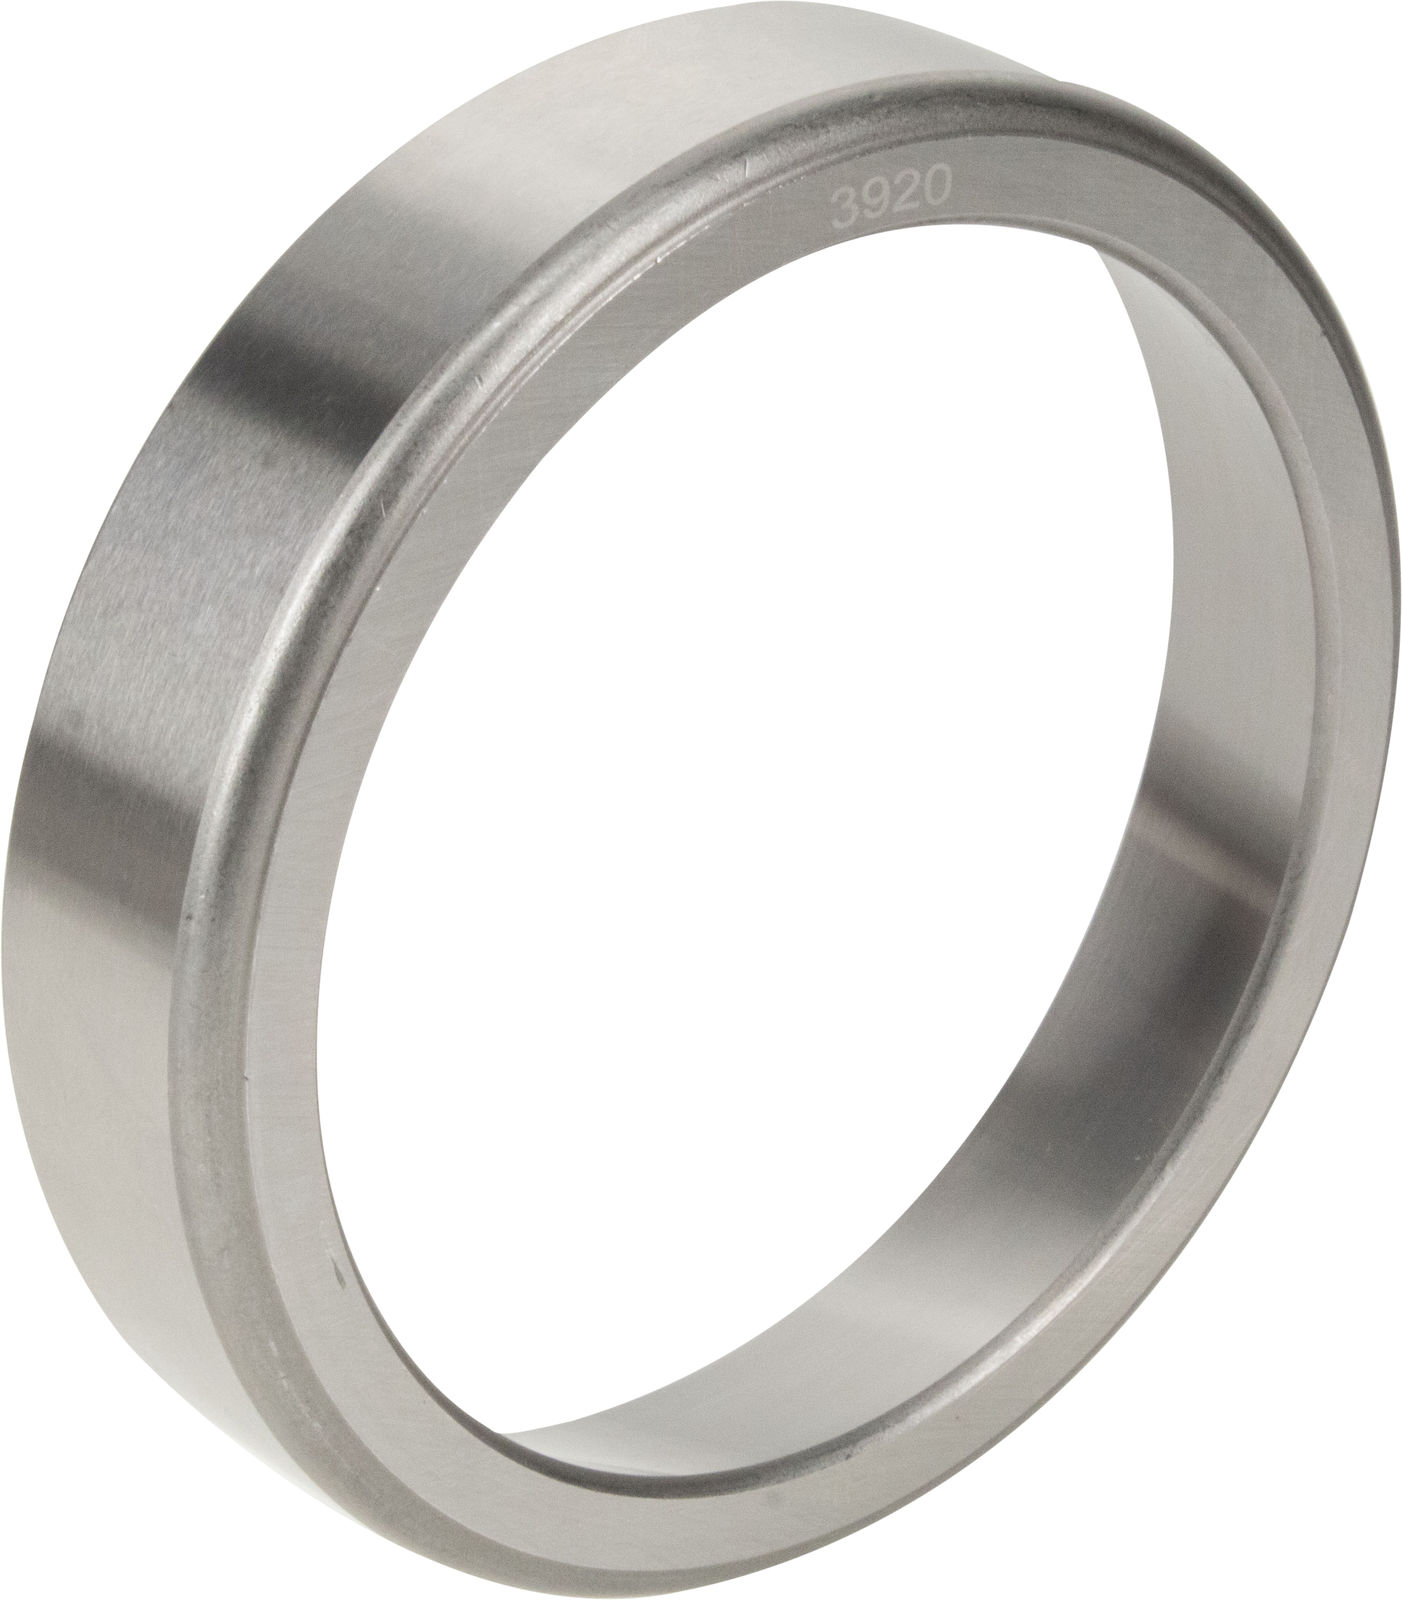 JD7378 JD7292 Replacement Tapered Roller Bearing Race Cone and Cup Aftermarket 